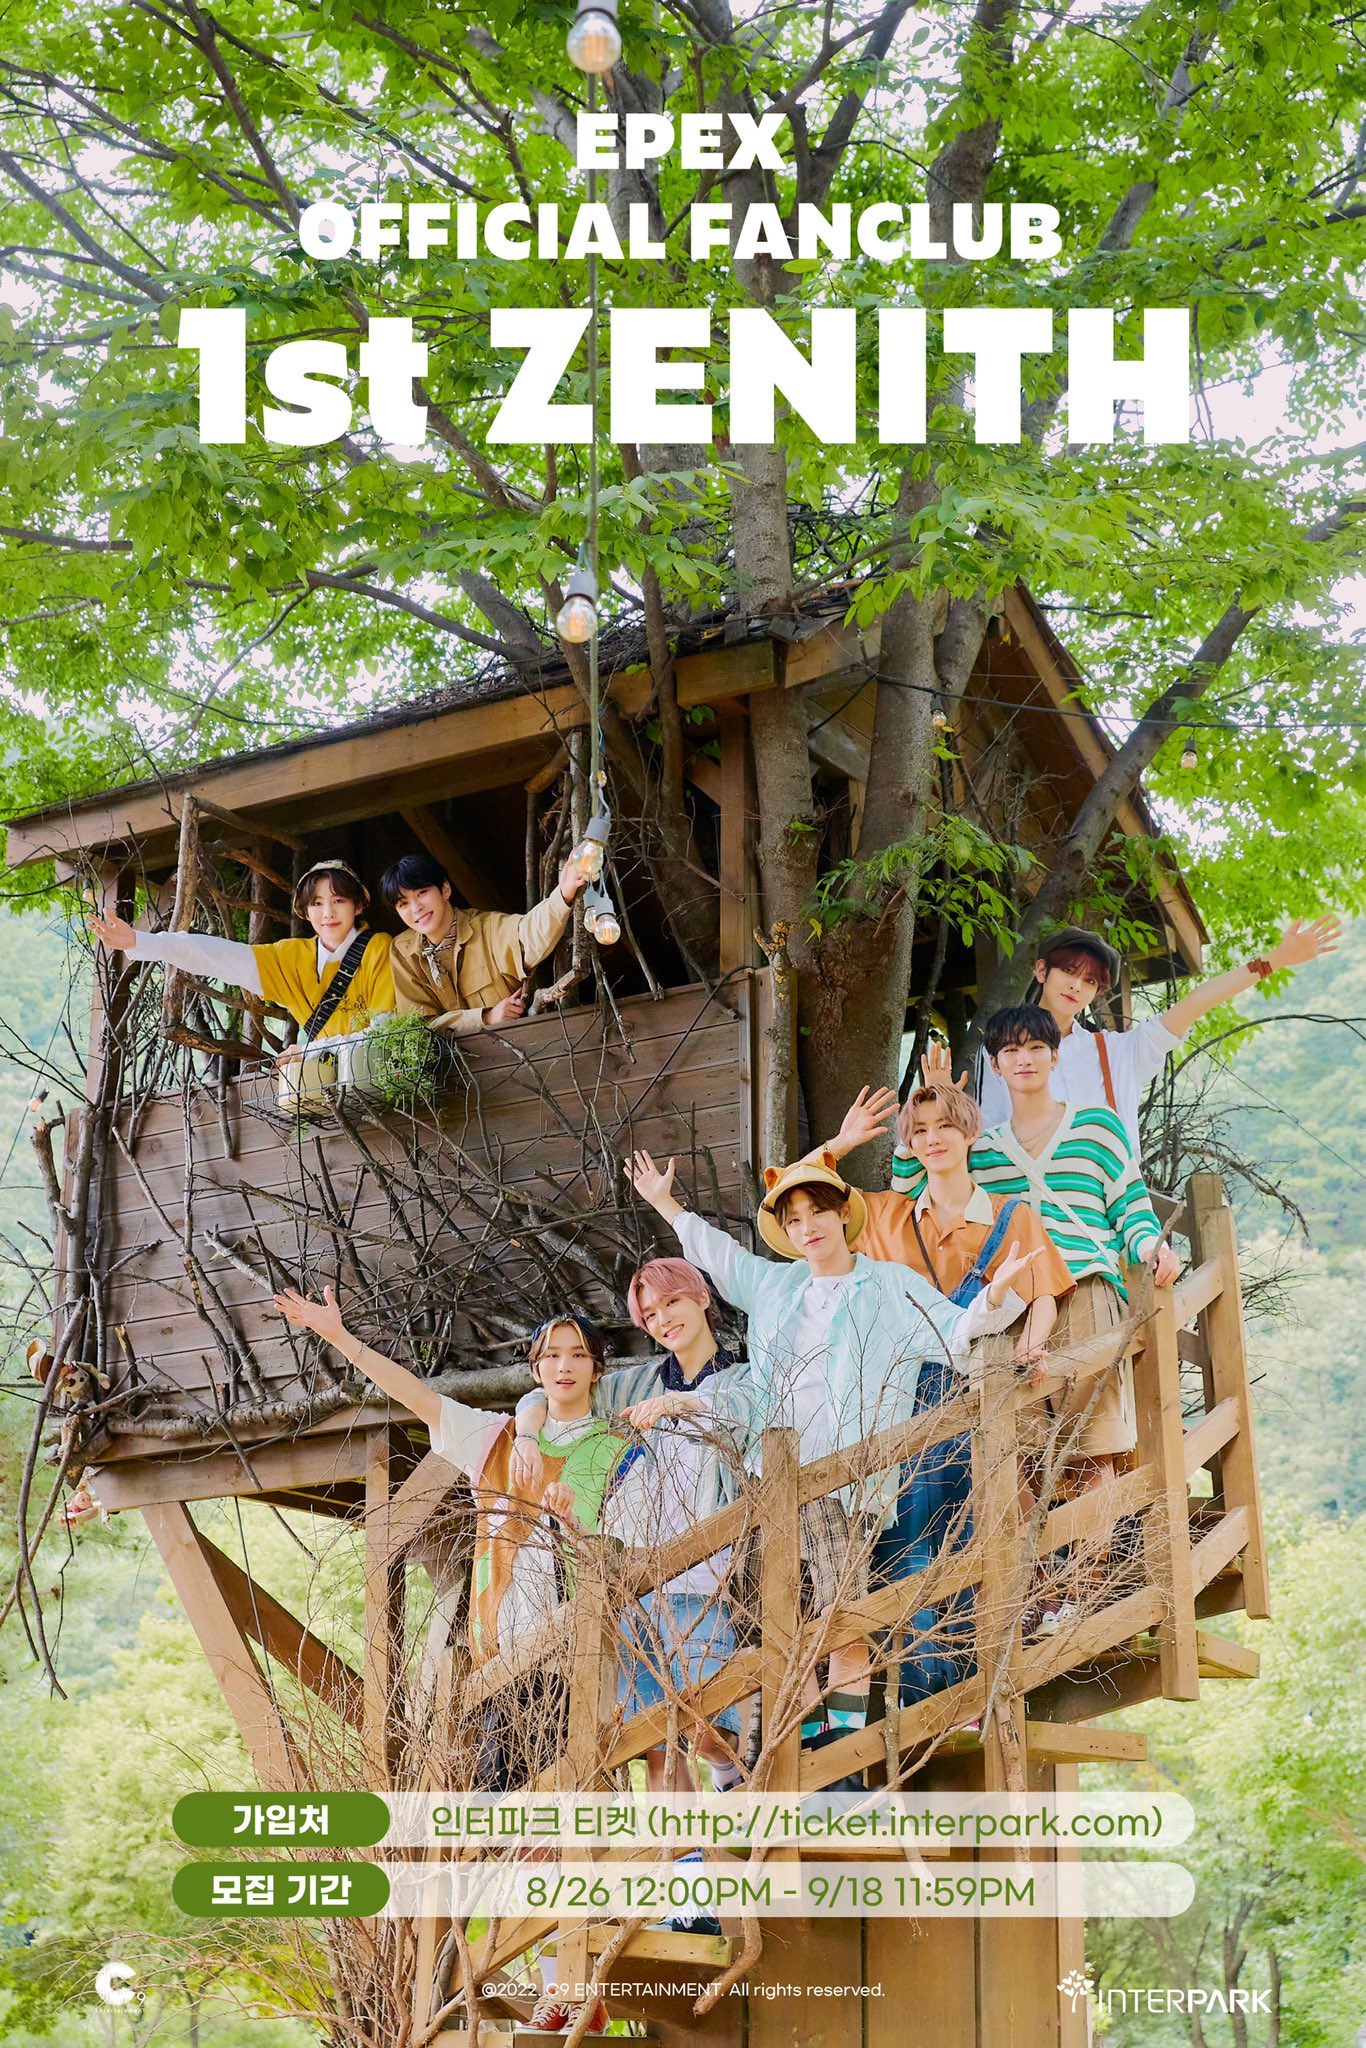 EPEX ファンクラブ　ZENITH  1期　キット